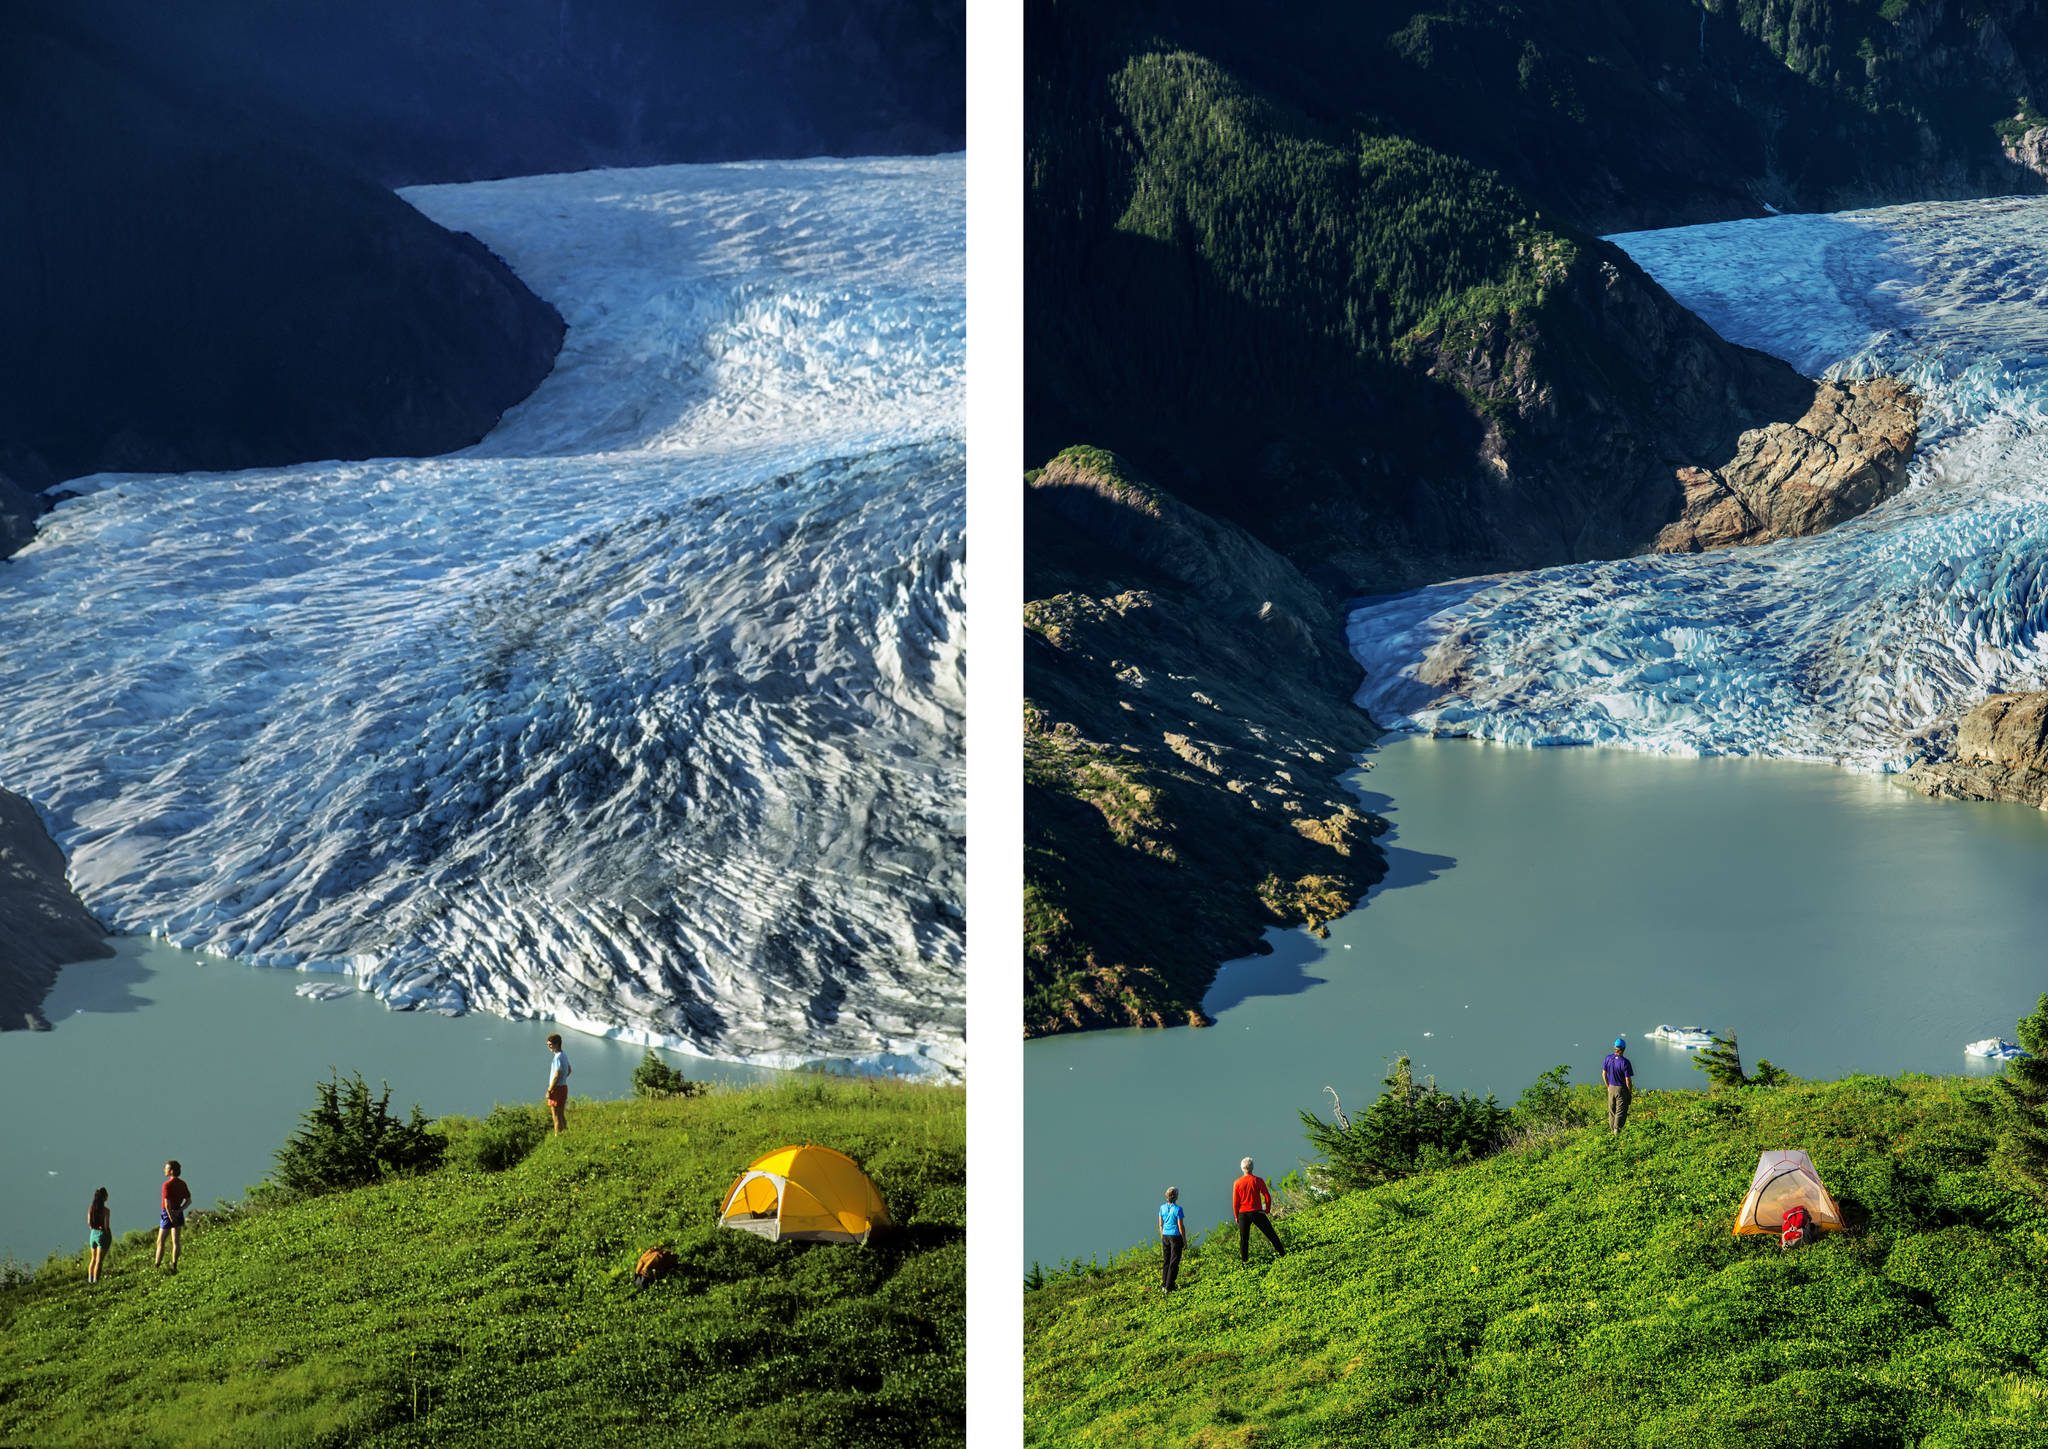 The photo on the left was taken in 1986, the one on the right in 2012. In these 26 years the Mendenhall Glacier retreated roughly a mile, and vertically thinned about 700 feet in some places. (Photo courtesy of Mark Kelley)